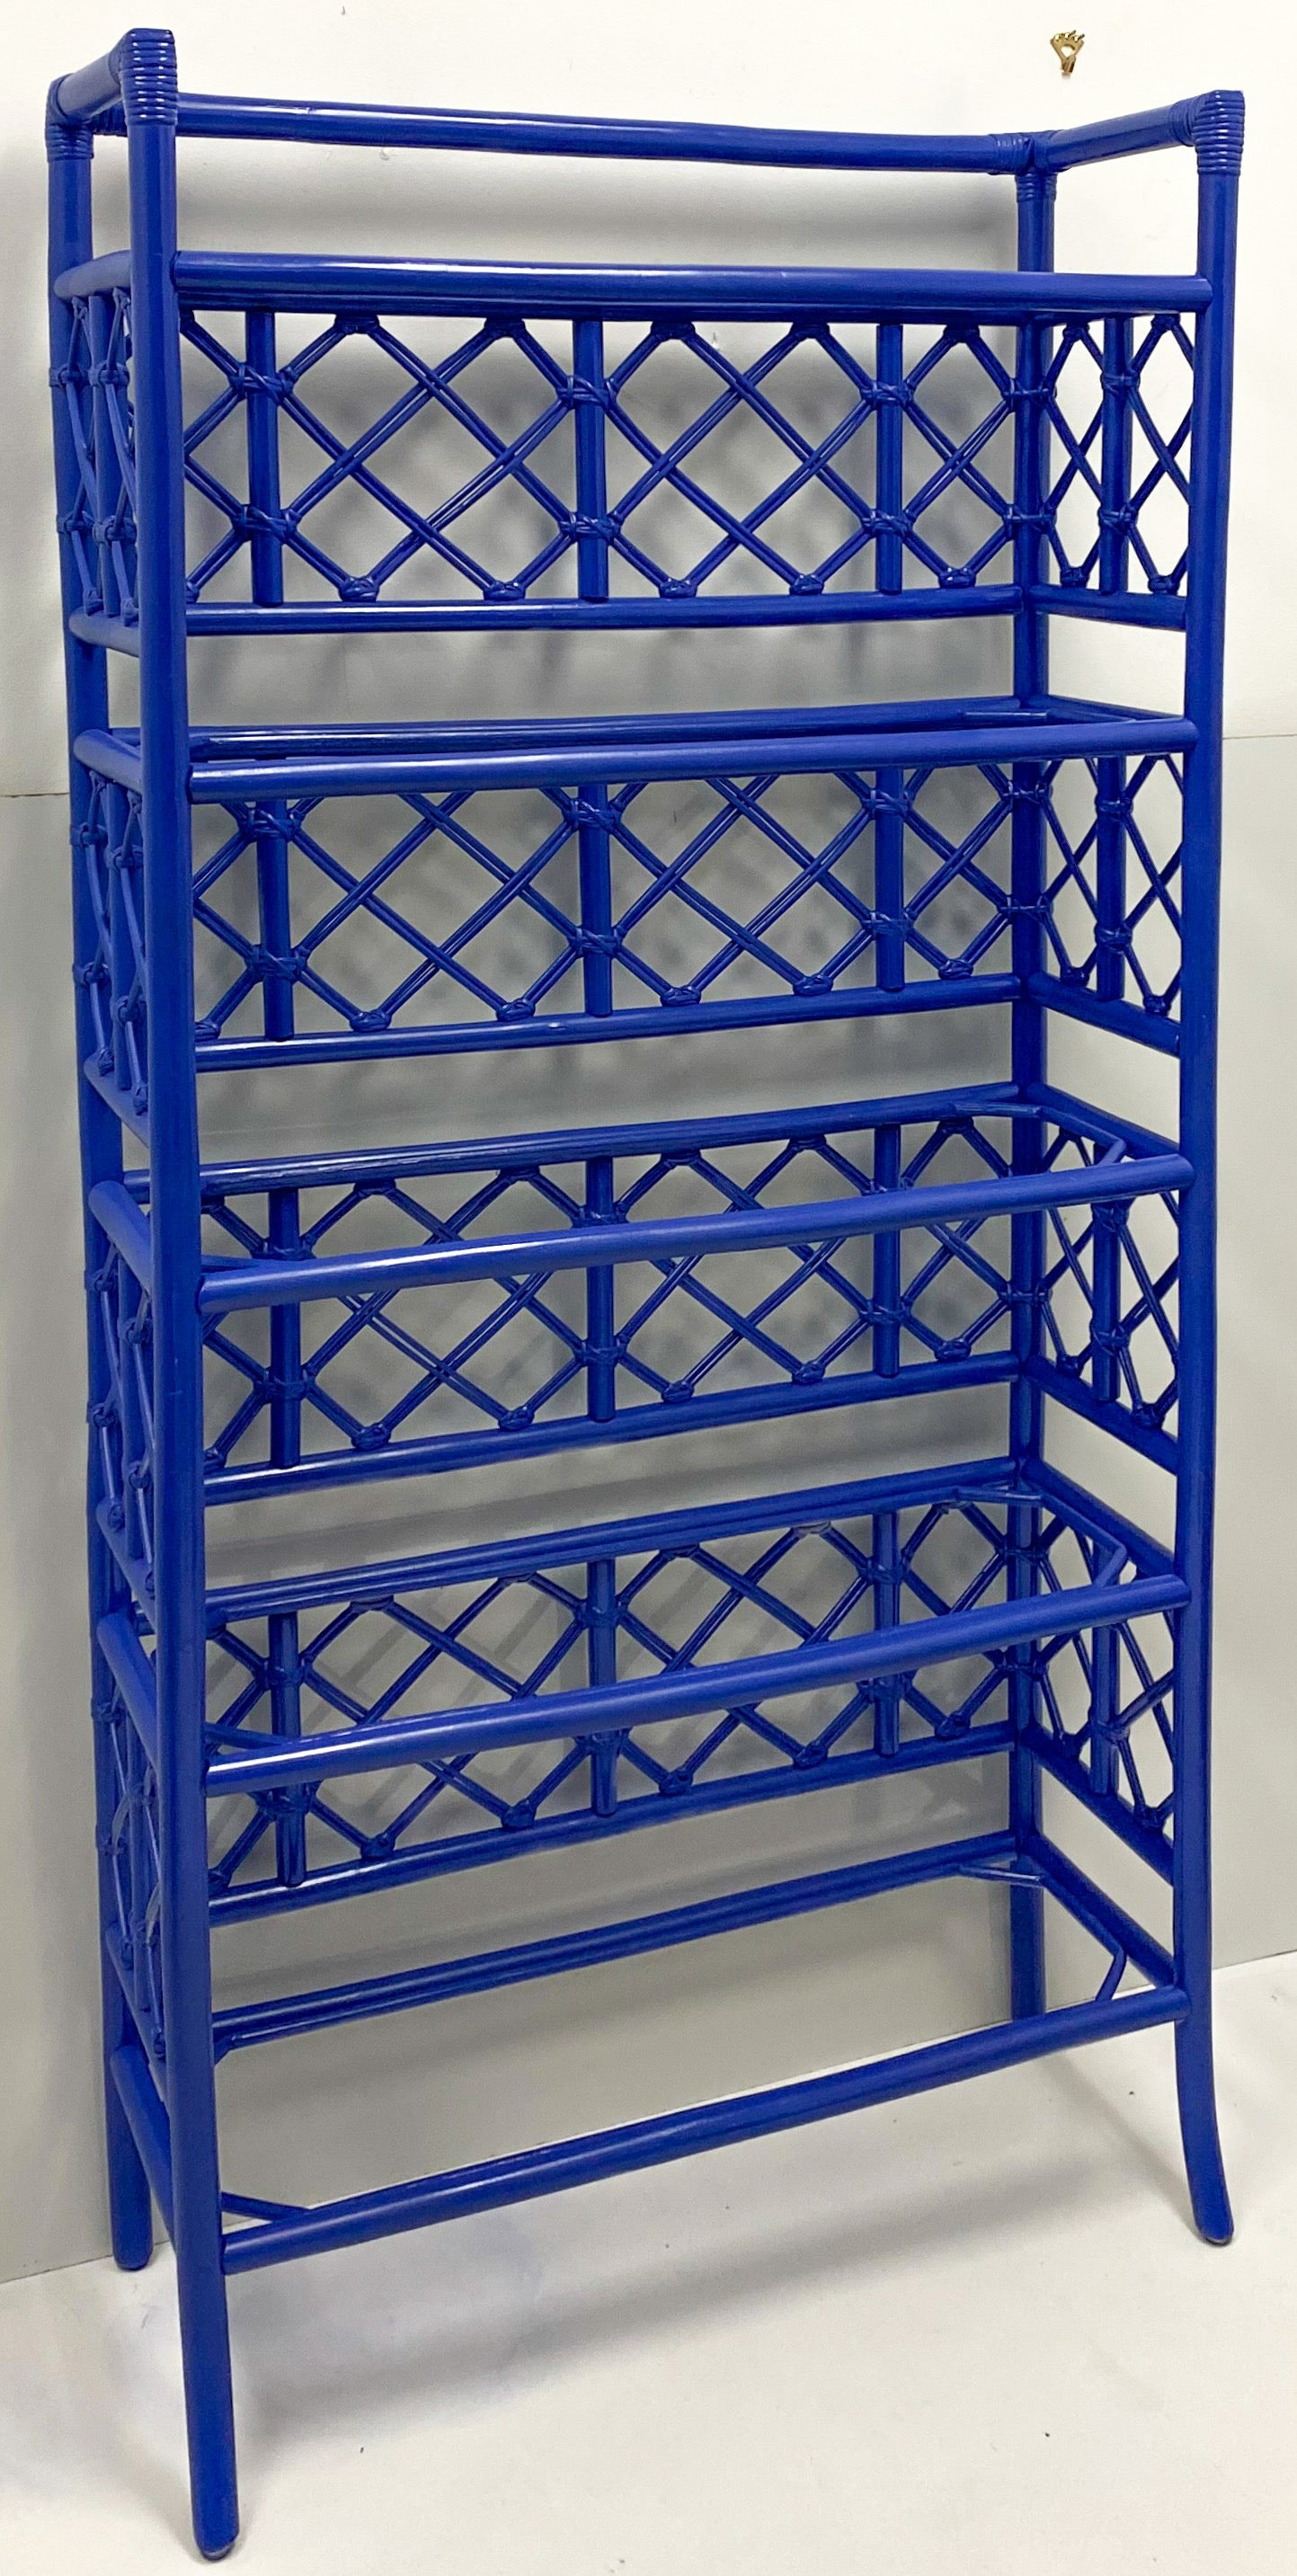 This is a rattan shelving unit or etagere by McGuire out of San Francisco. It is marked and in very good condition. The piece has glass shelves that are 10.5 inches deep. 

My shipping is for the Continental US only.